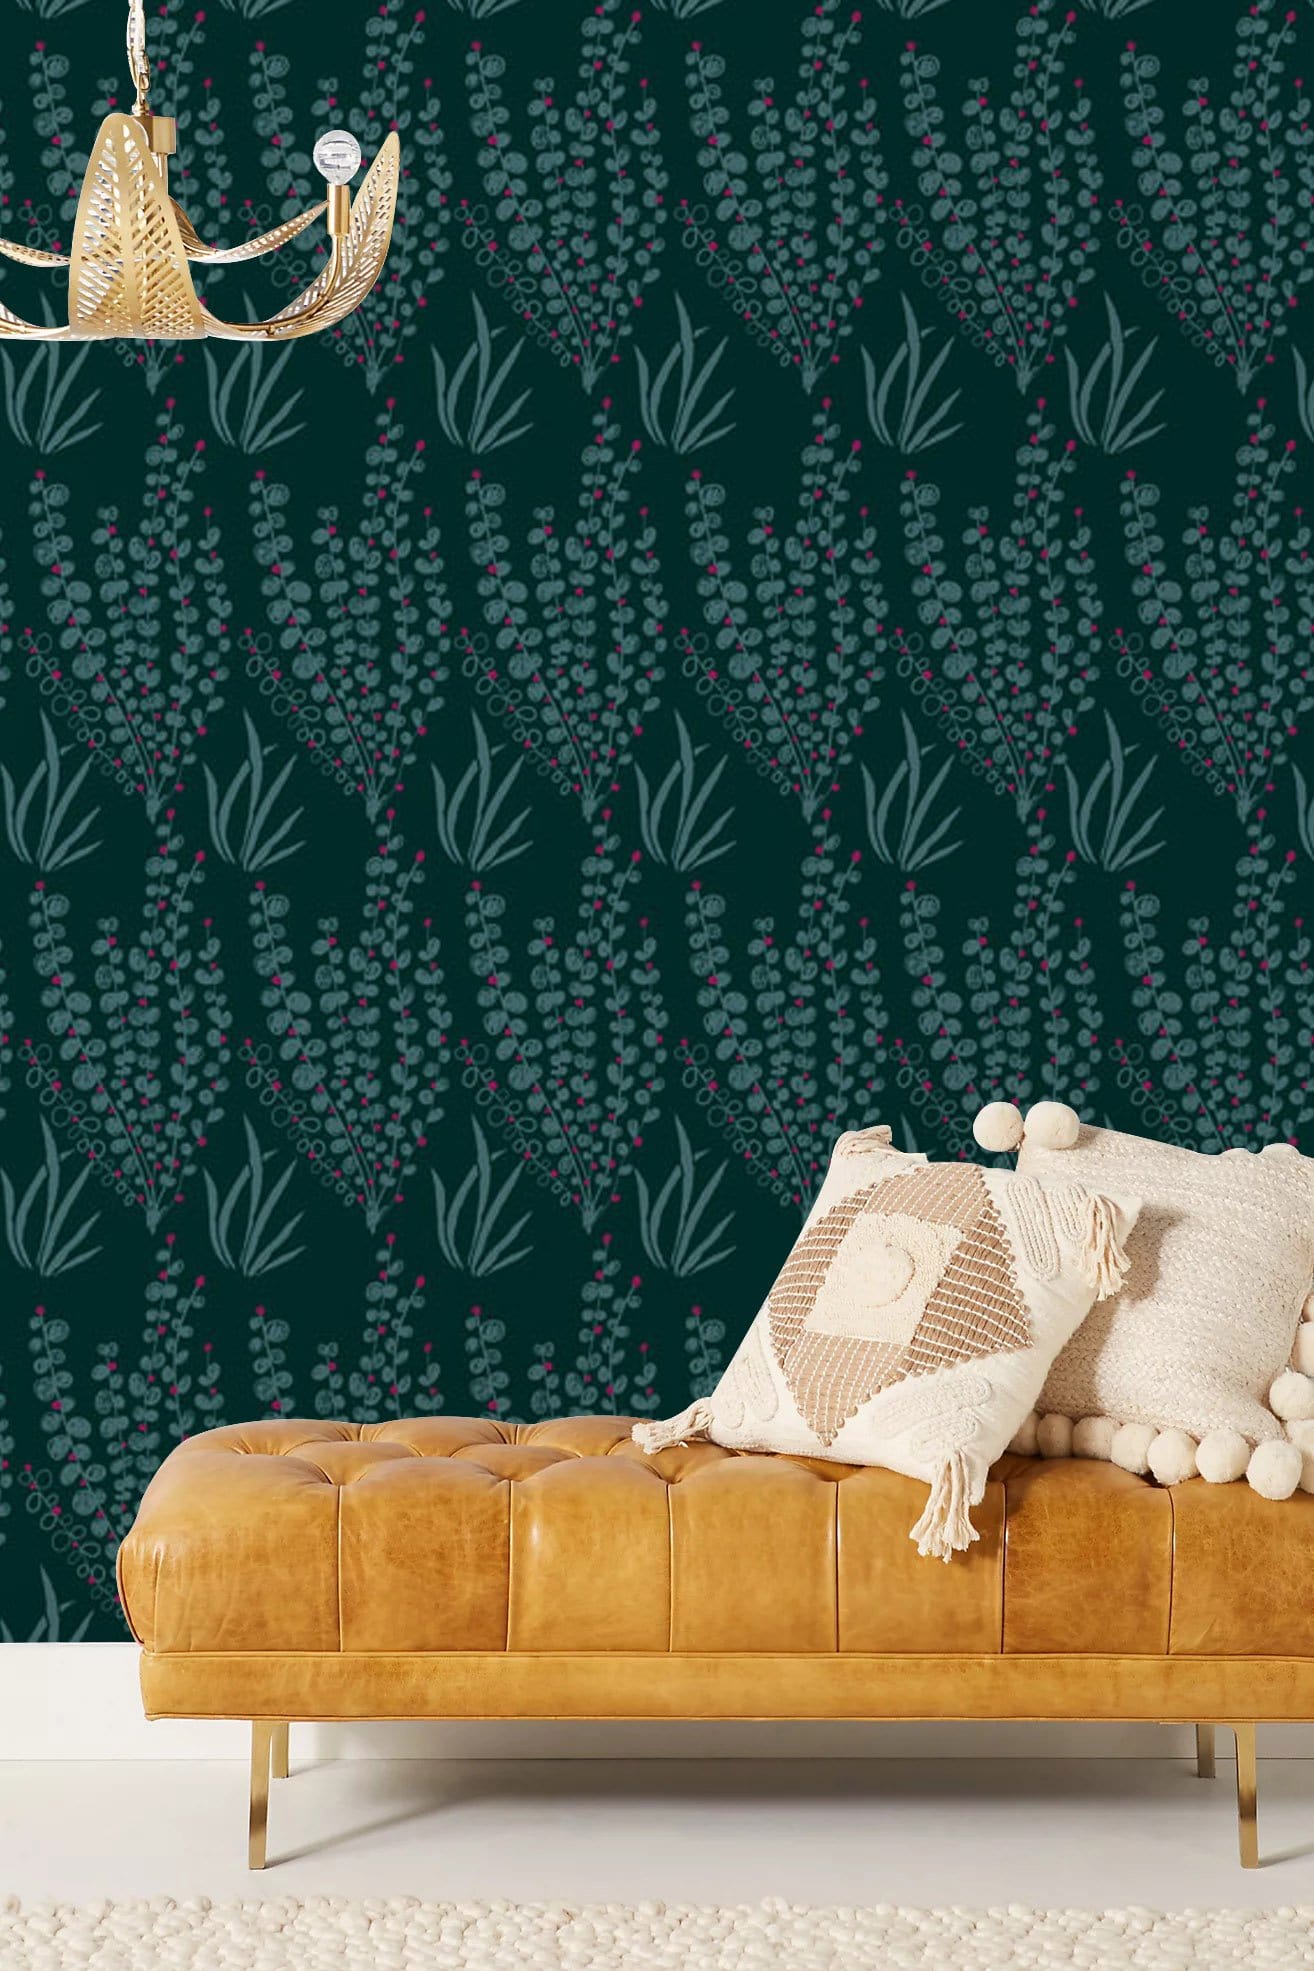 Wallpaper mural with a dark green orchid blossom design for the hallway's decor